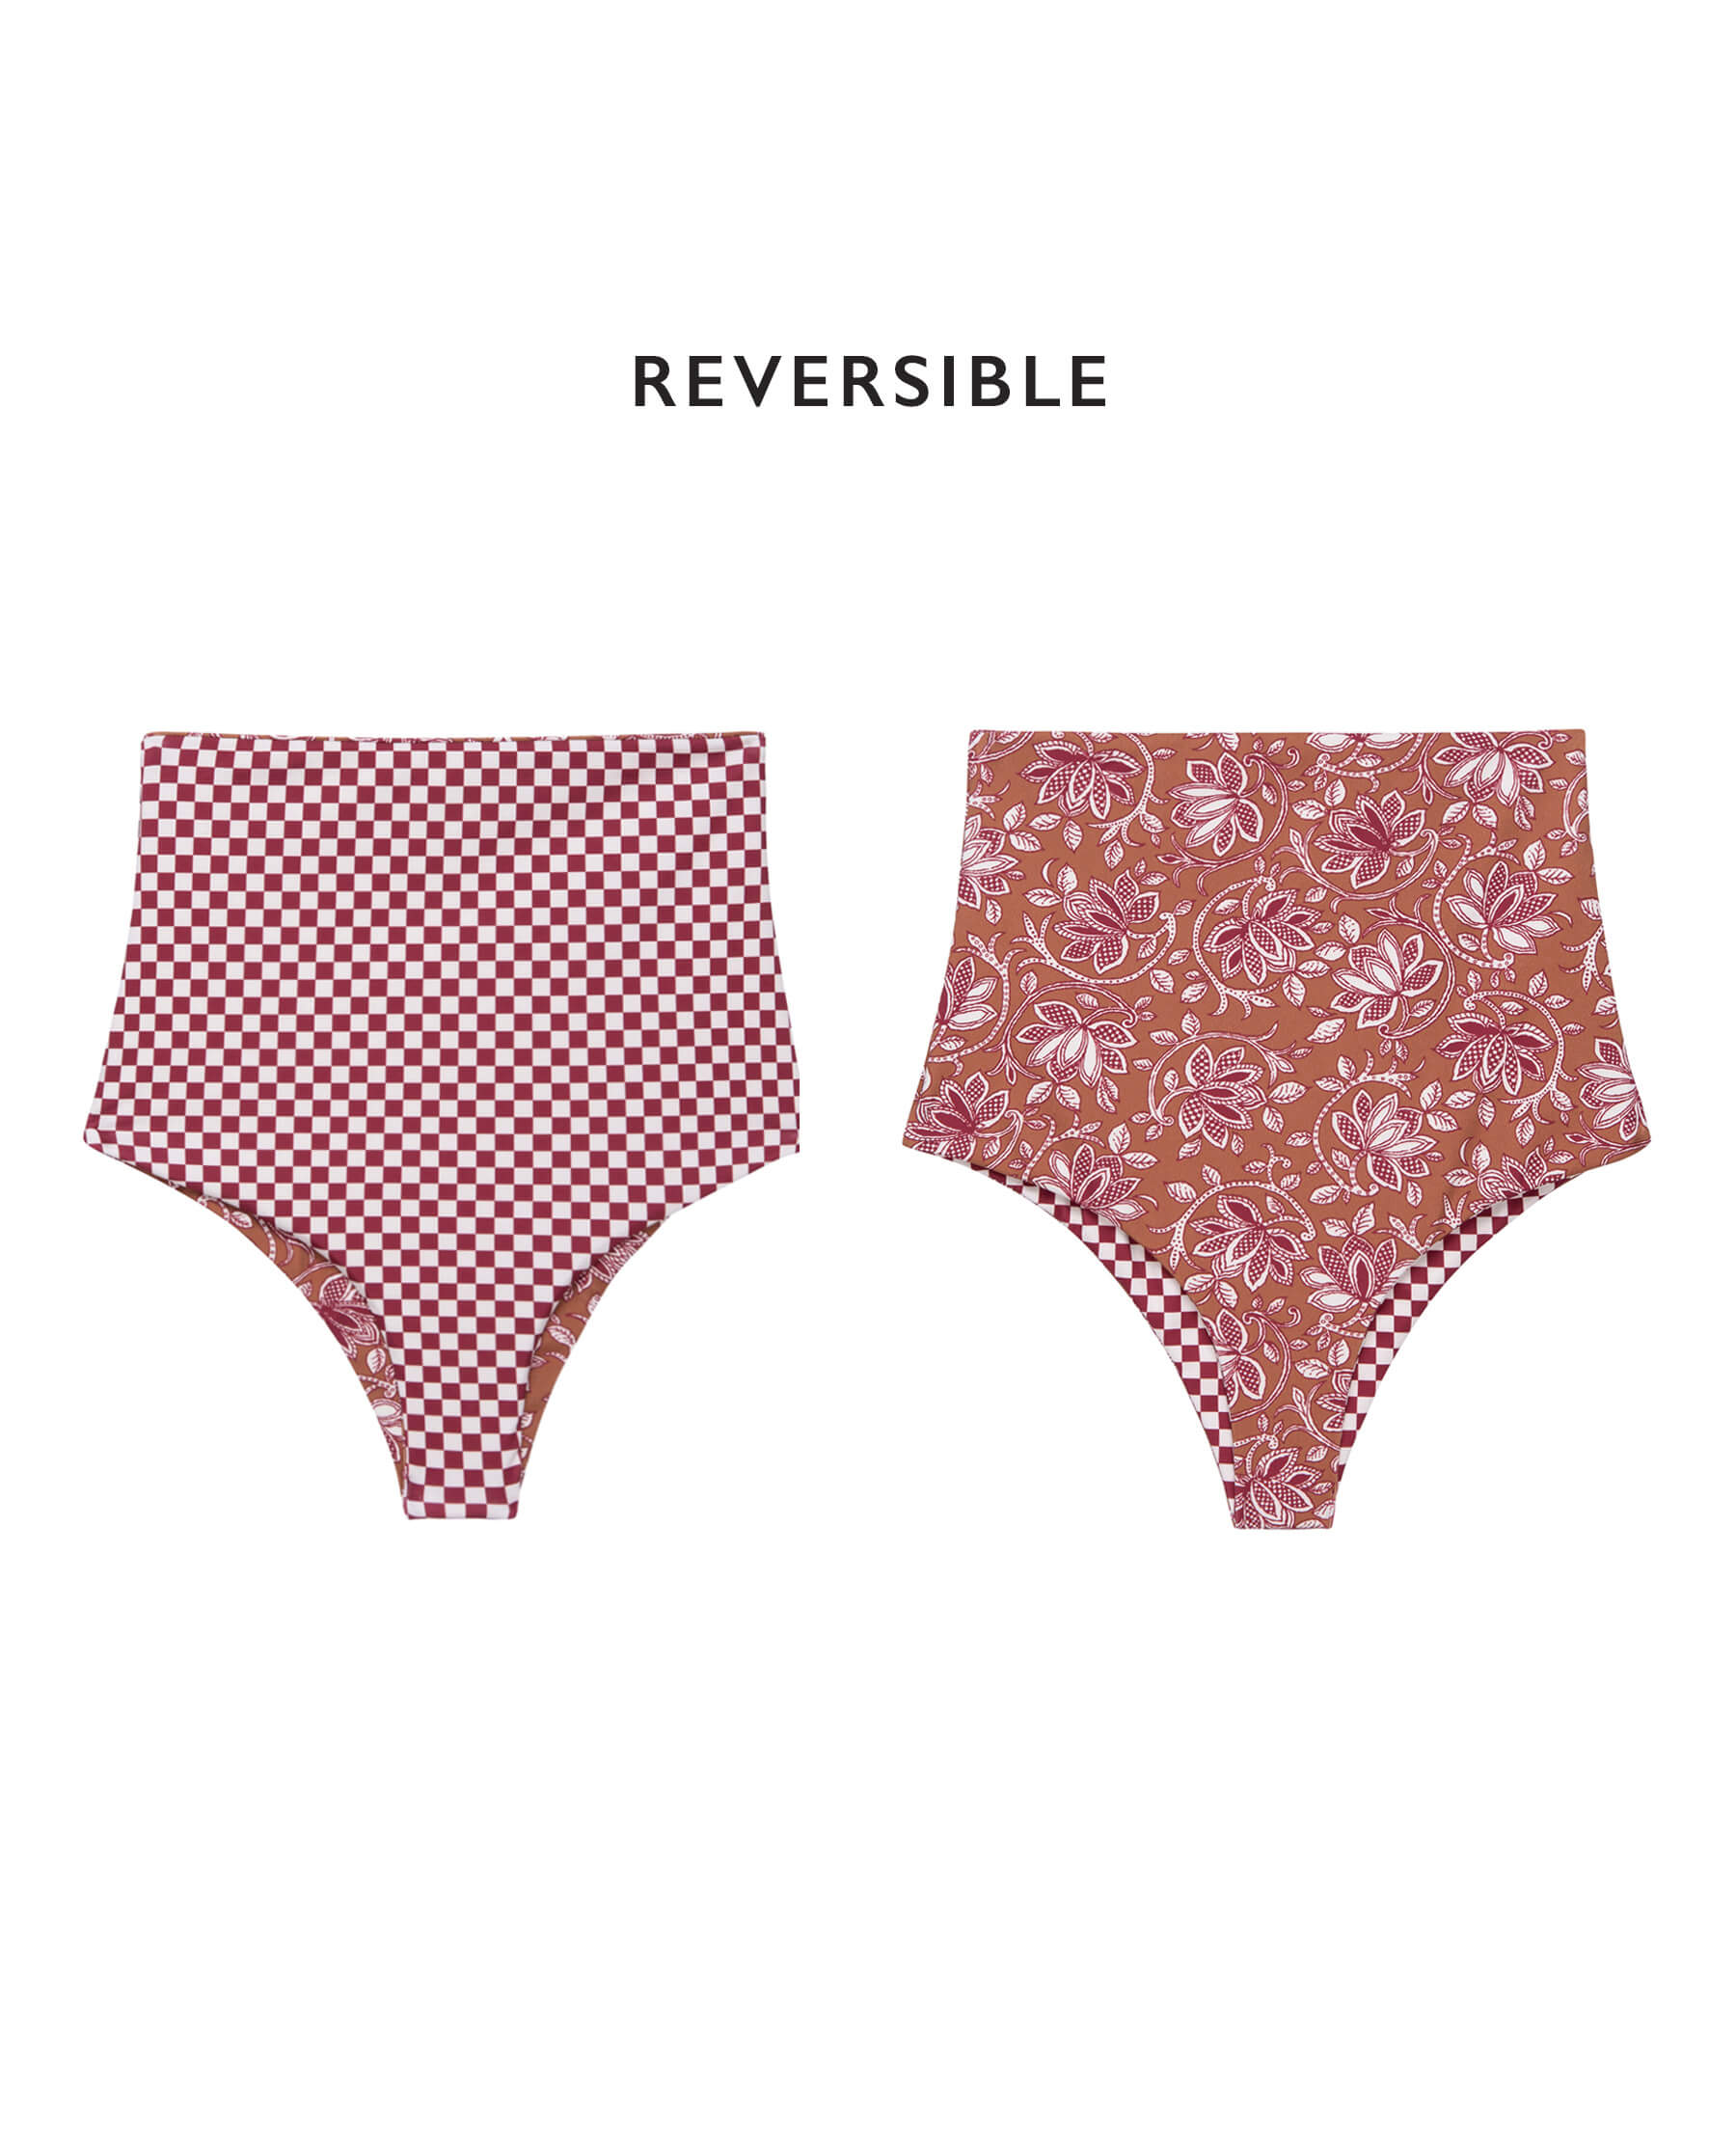 The Reversible High-Rise Brief. -- Ruby Check and Golden Sands Oasis Floral SWIM BOTTOMS THE GREAT. SP24 SWIM